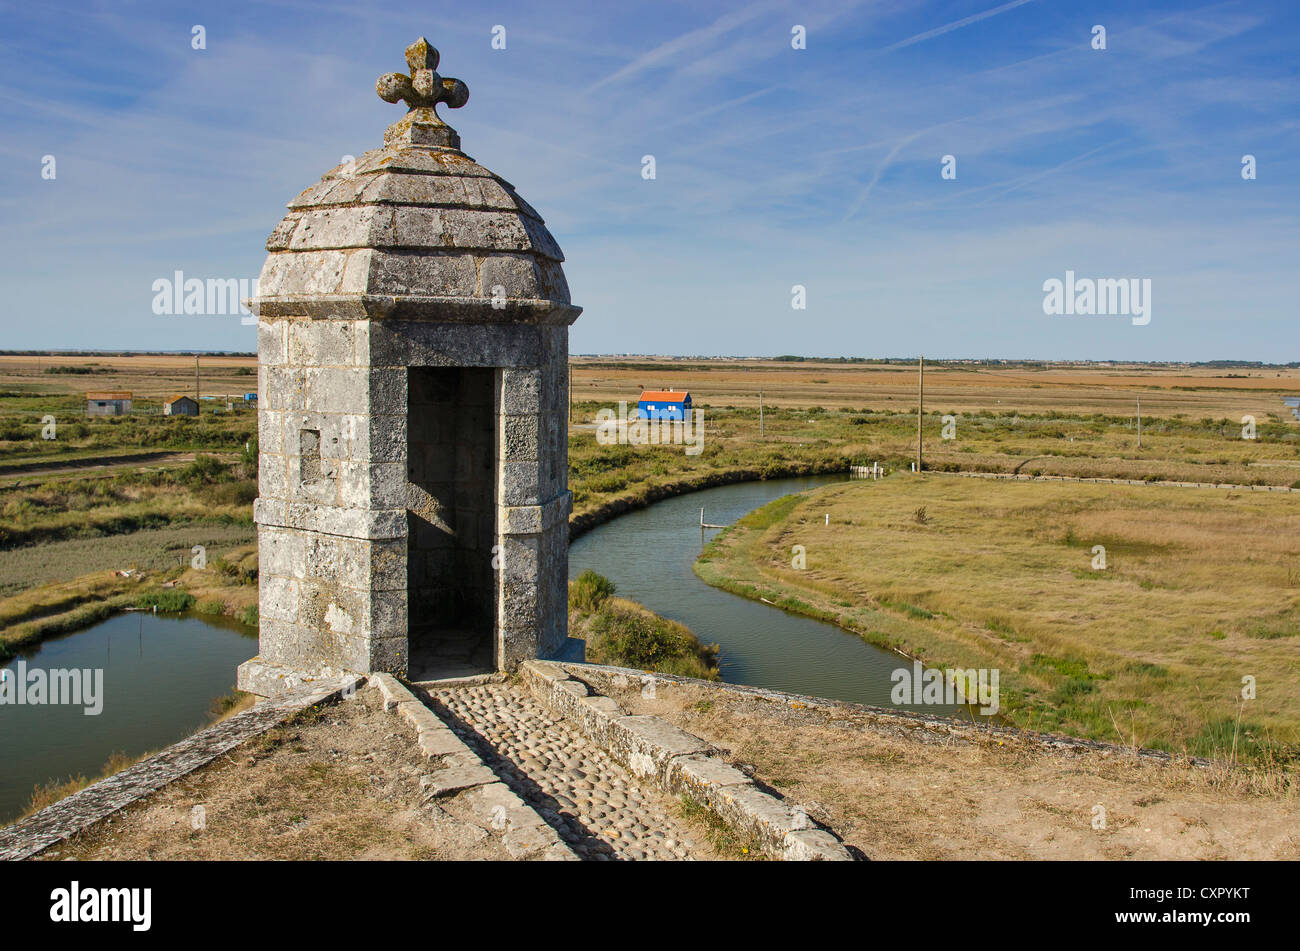 Sentry box, walled city of Brouage, Charente Maritime, France Stock Photo